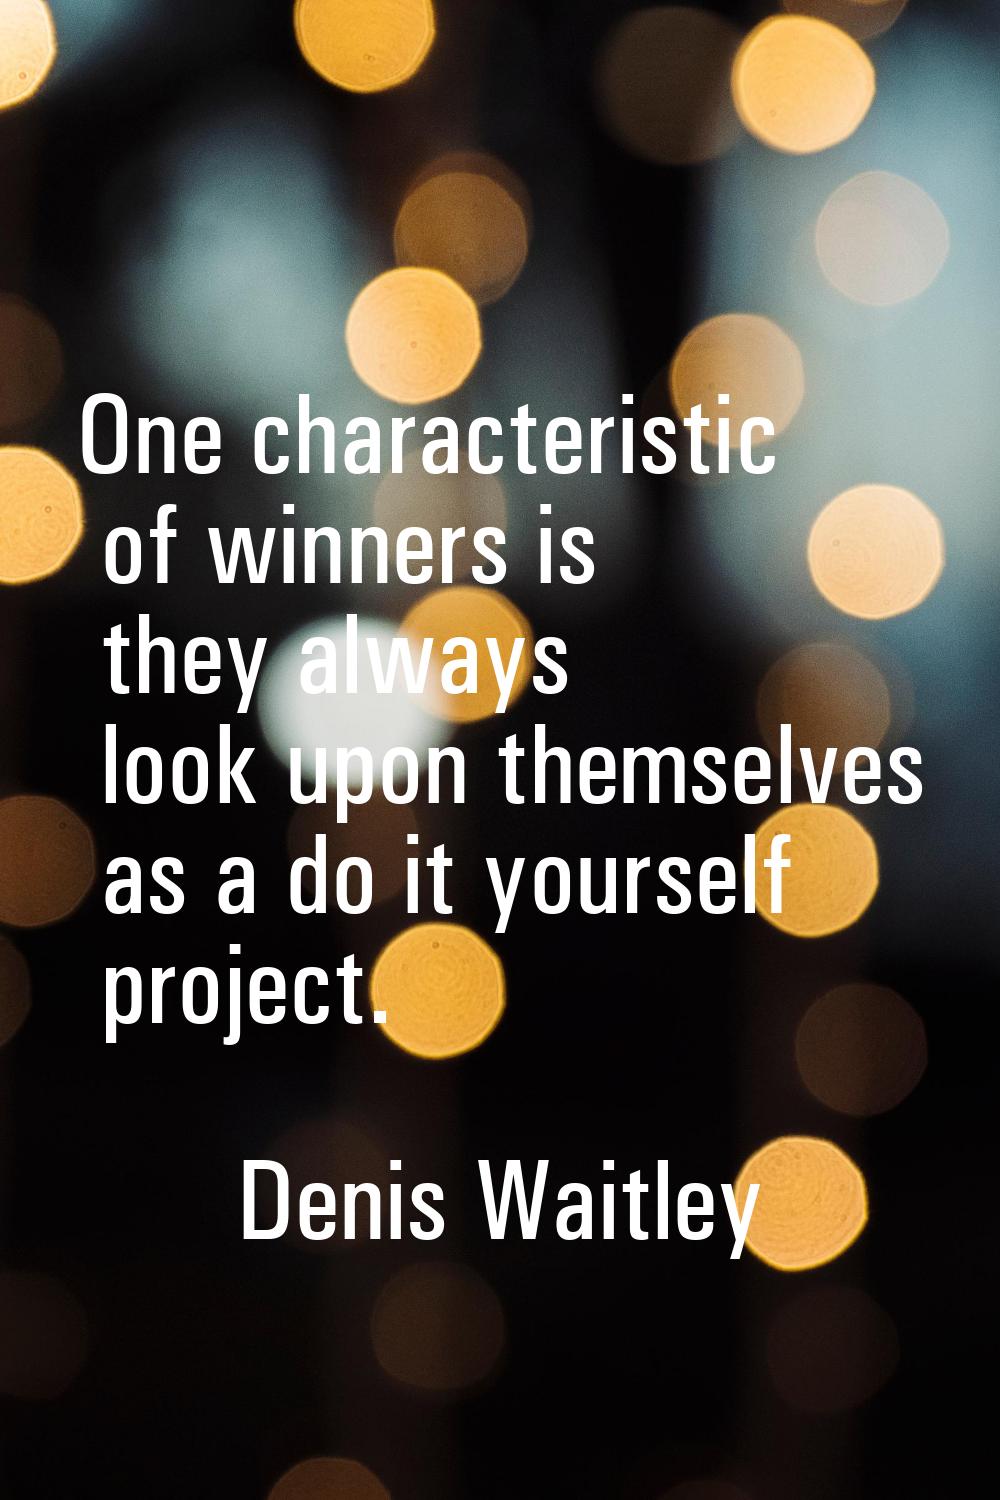 One characteristic of winners is they always look upon themselves as a do it yourself project.